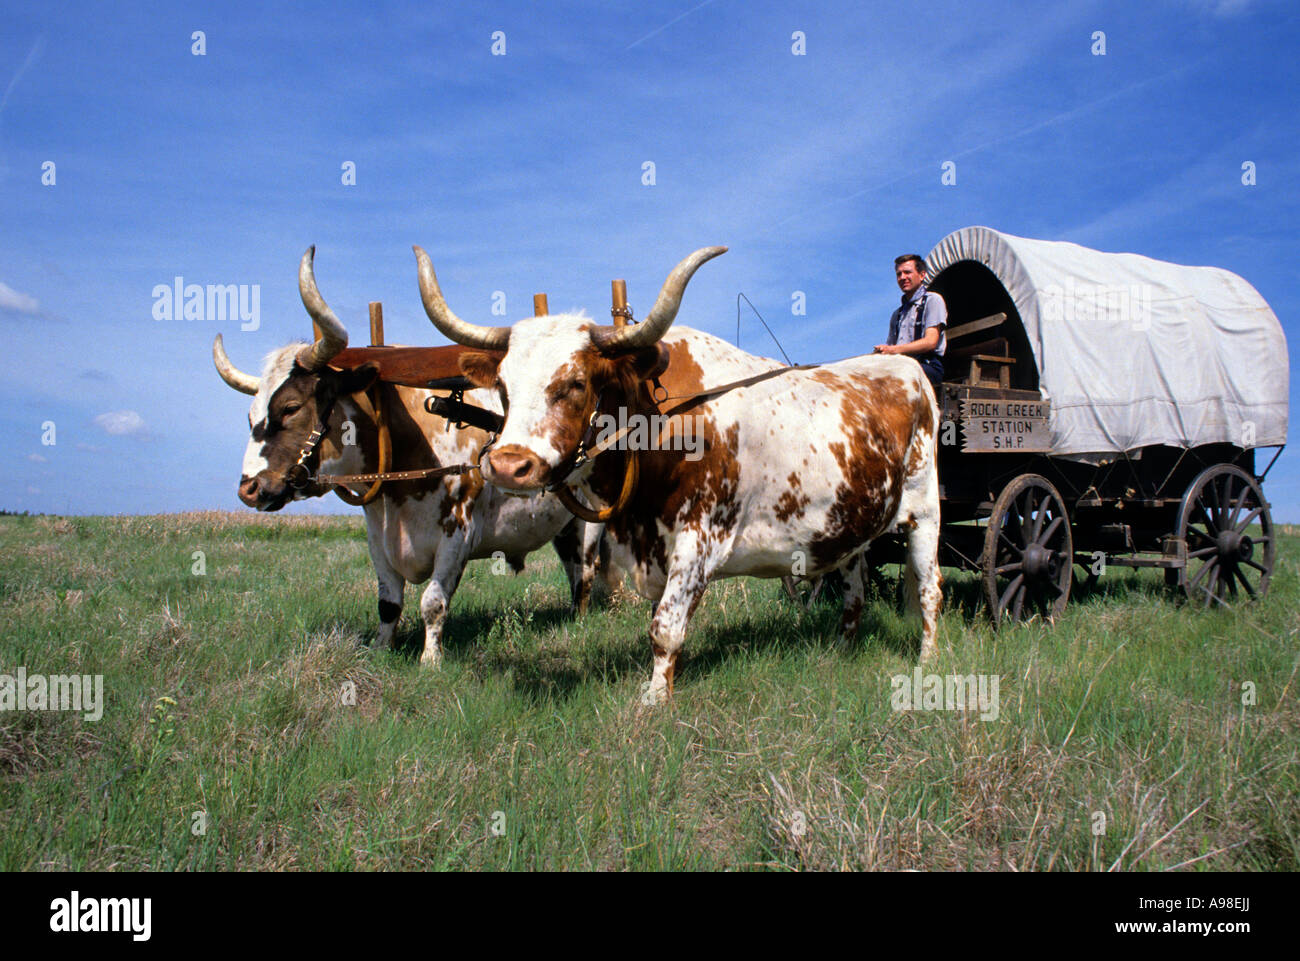 OXEN & COVERED WAGON ALONG THE OREGON TRAIL, ROCK CREEK STATION STATE HISTORICAL PARK IN S.E. NEBRASKA.  SUMMER. Stock Photo